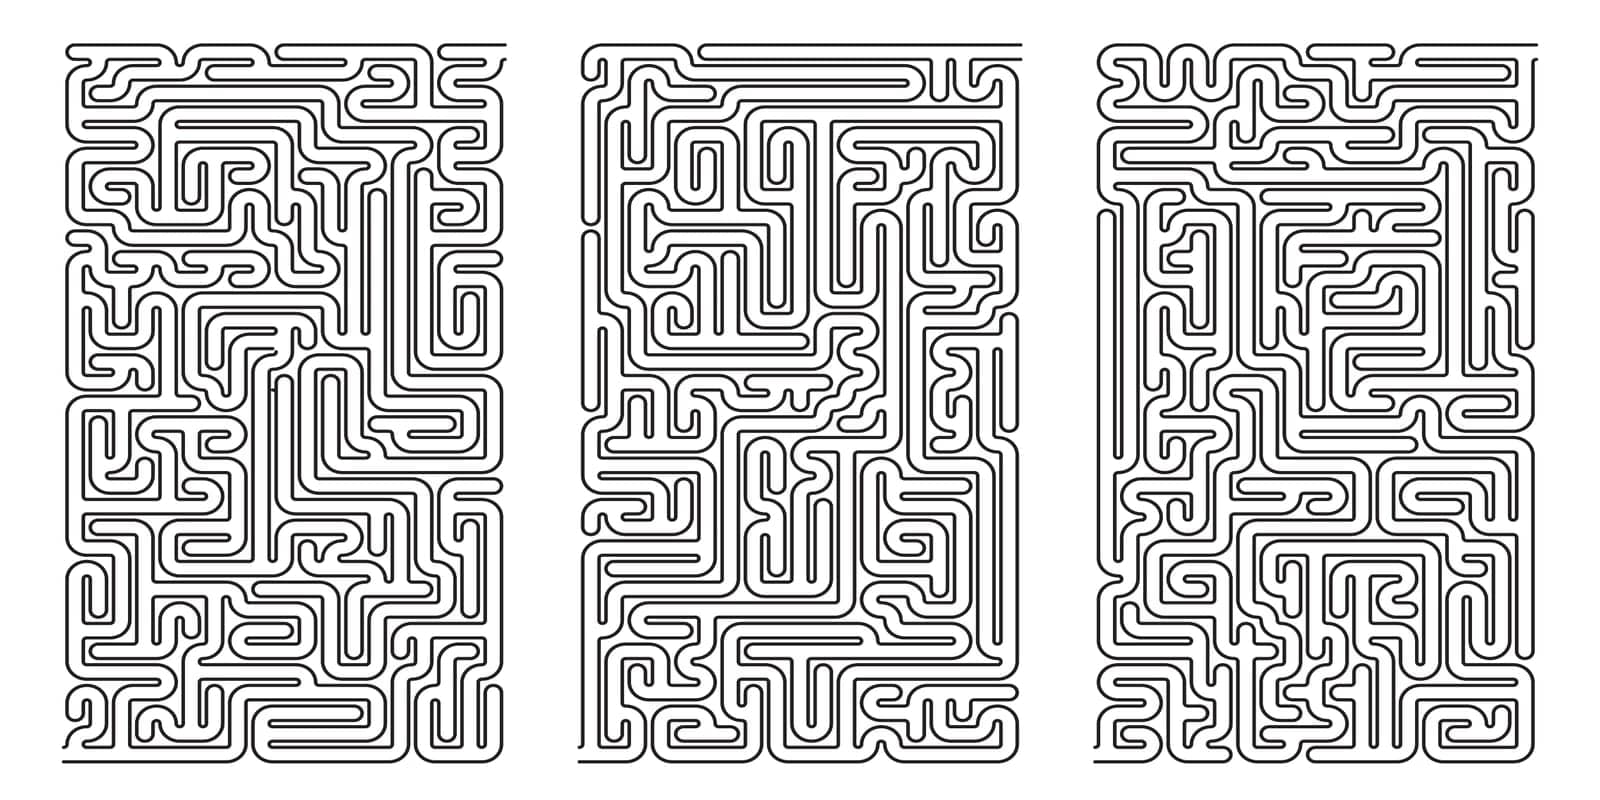 Vector mazes isolated on white background by tan4ikk1